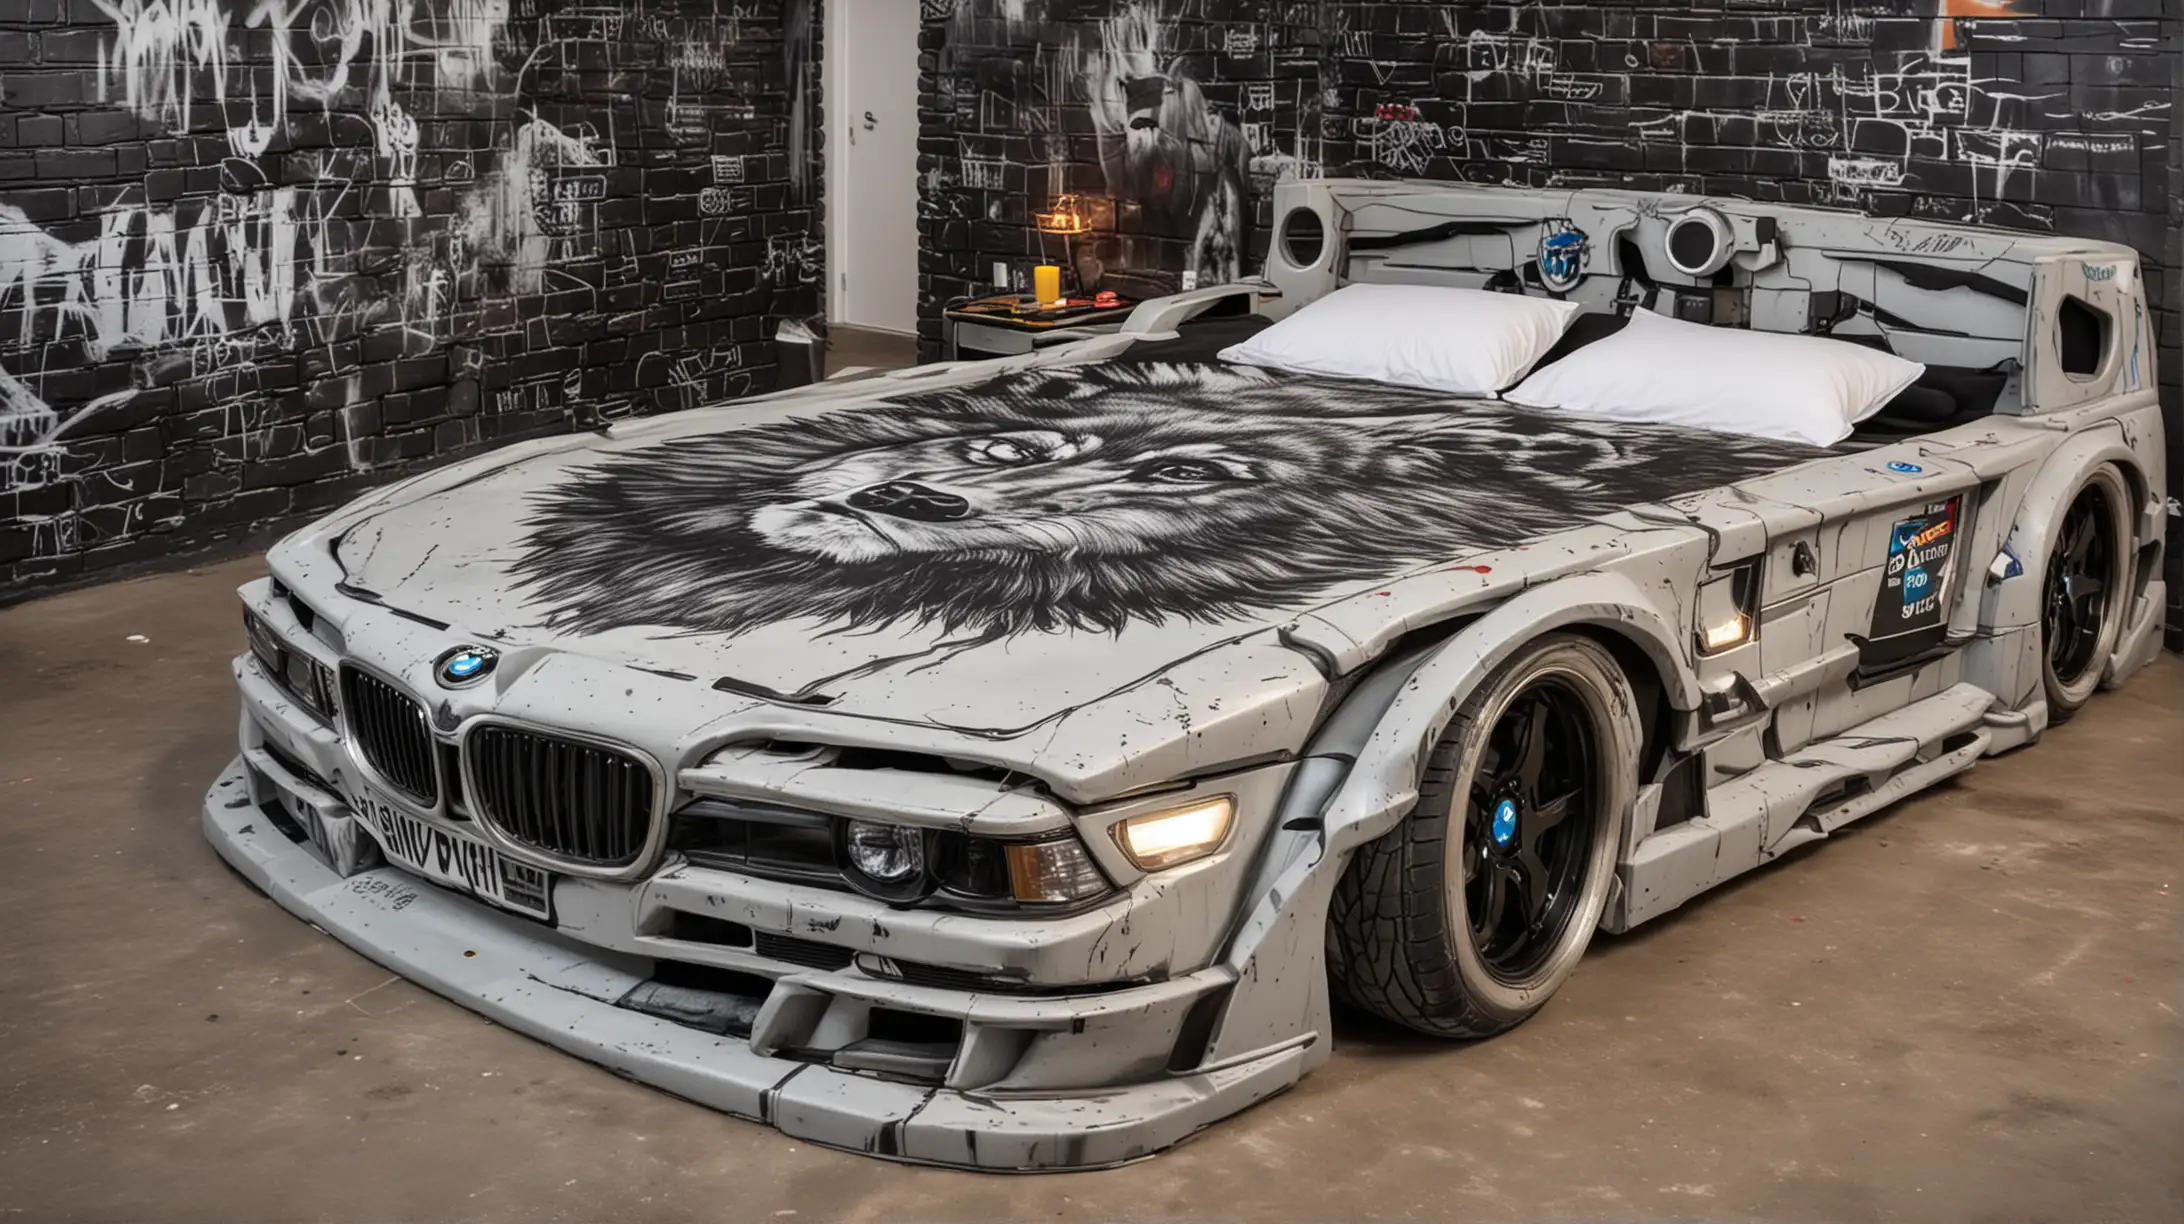 Double bed in the shape of a BMW car with headlights on and wolf graffiti